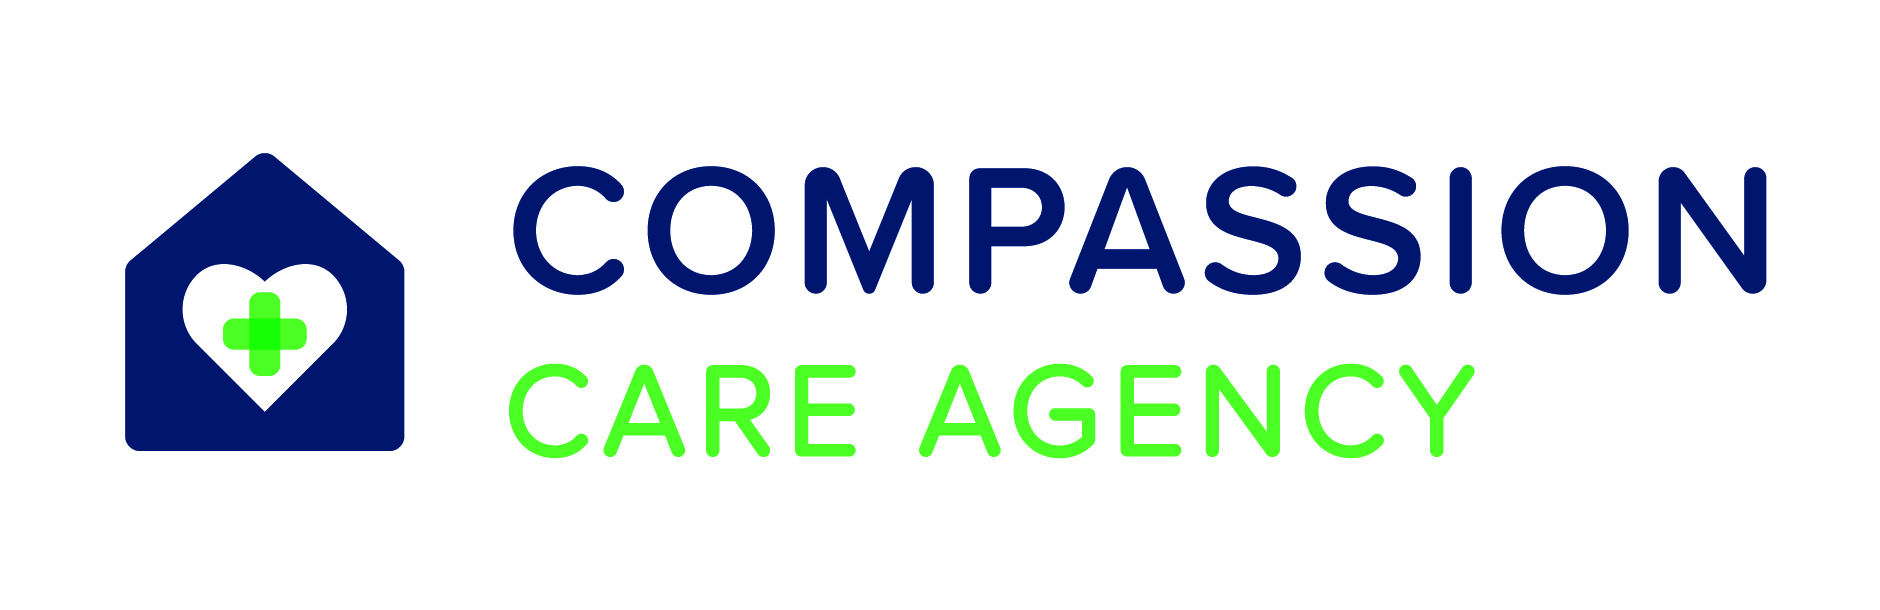  Compassion Care Agency